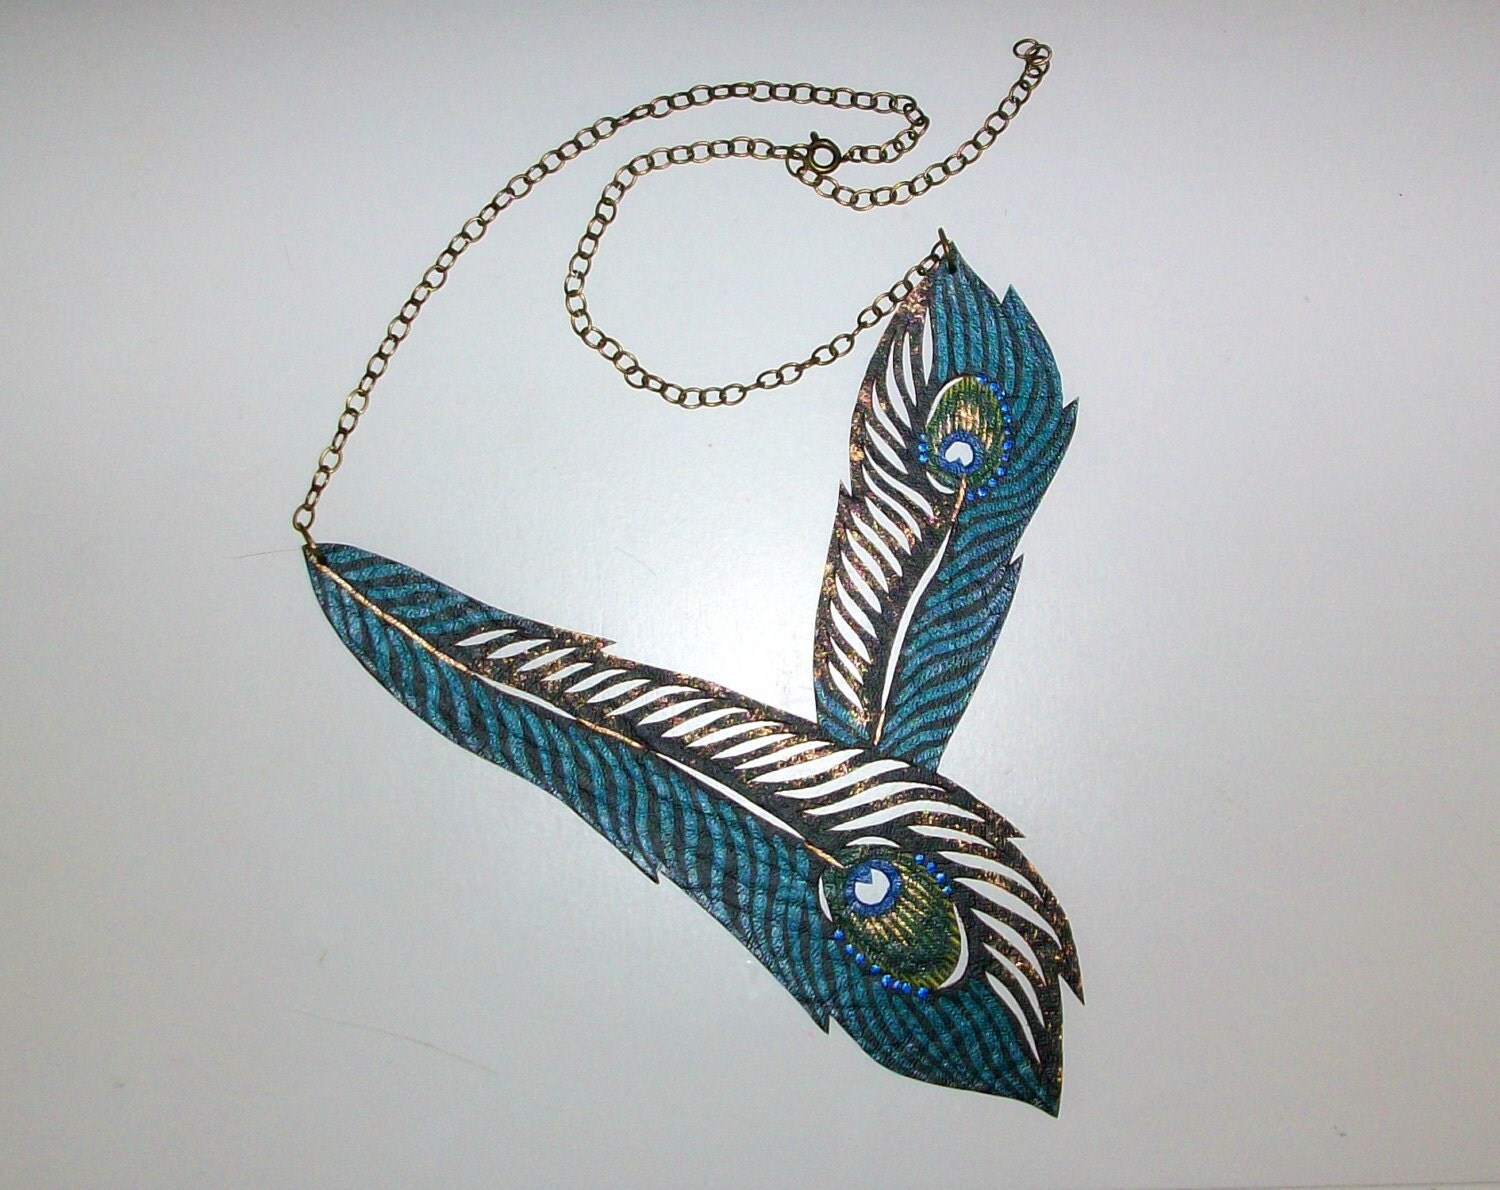 Peacock Necklace Vegan Feather Leather by AshleyAnnBennett on Etsy